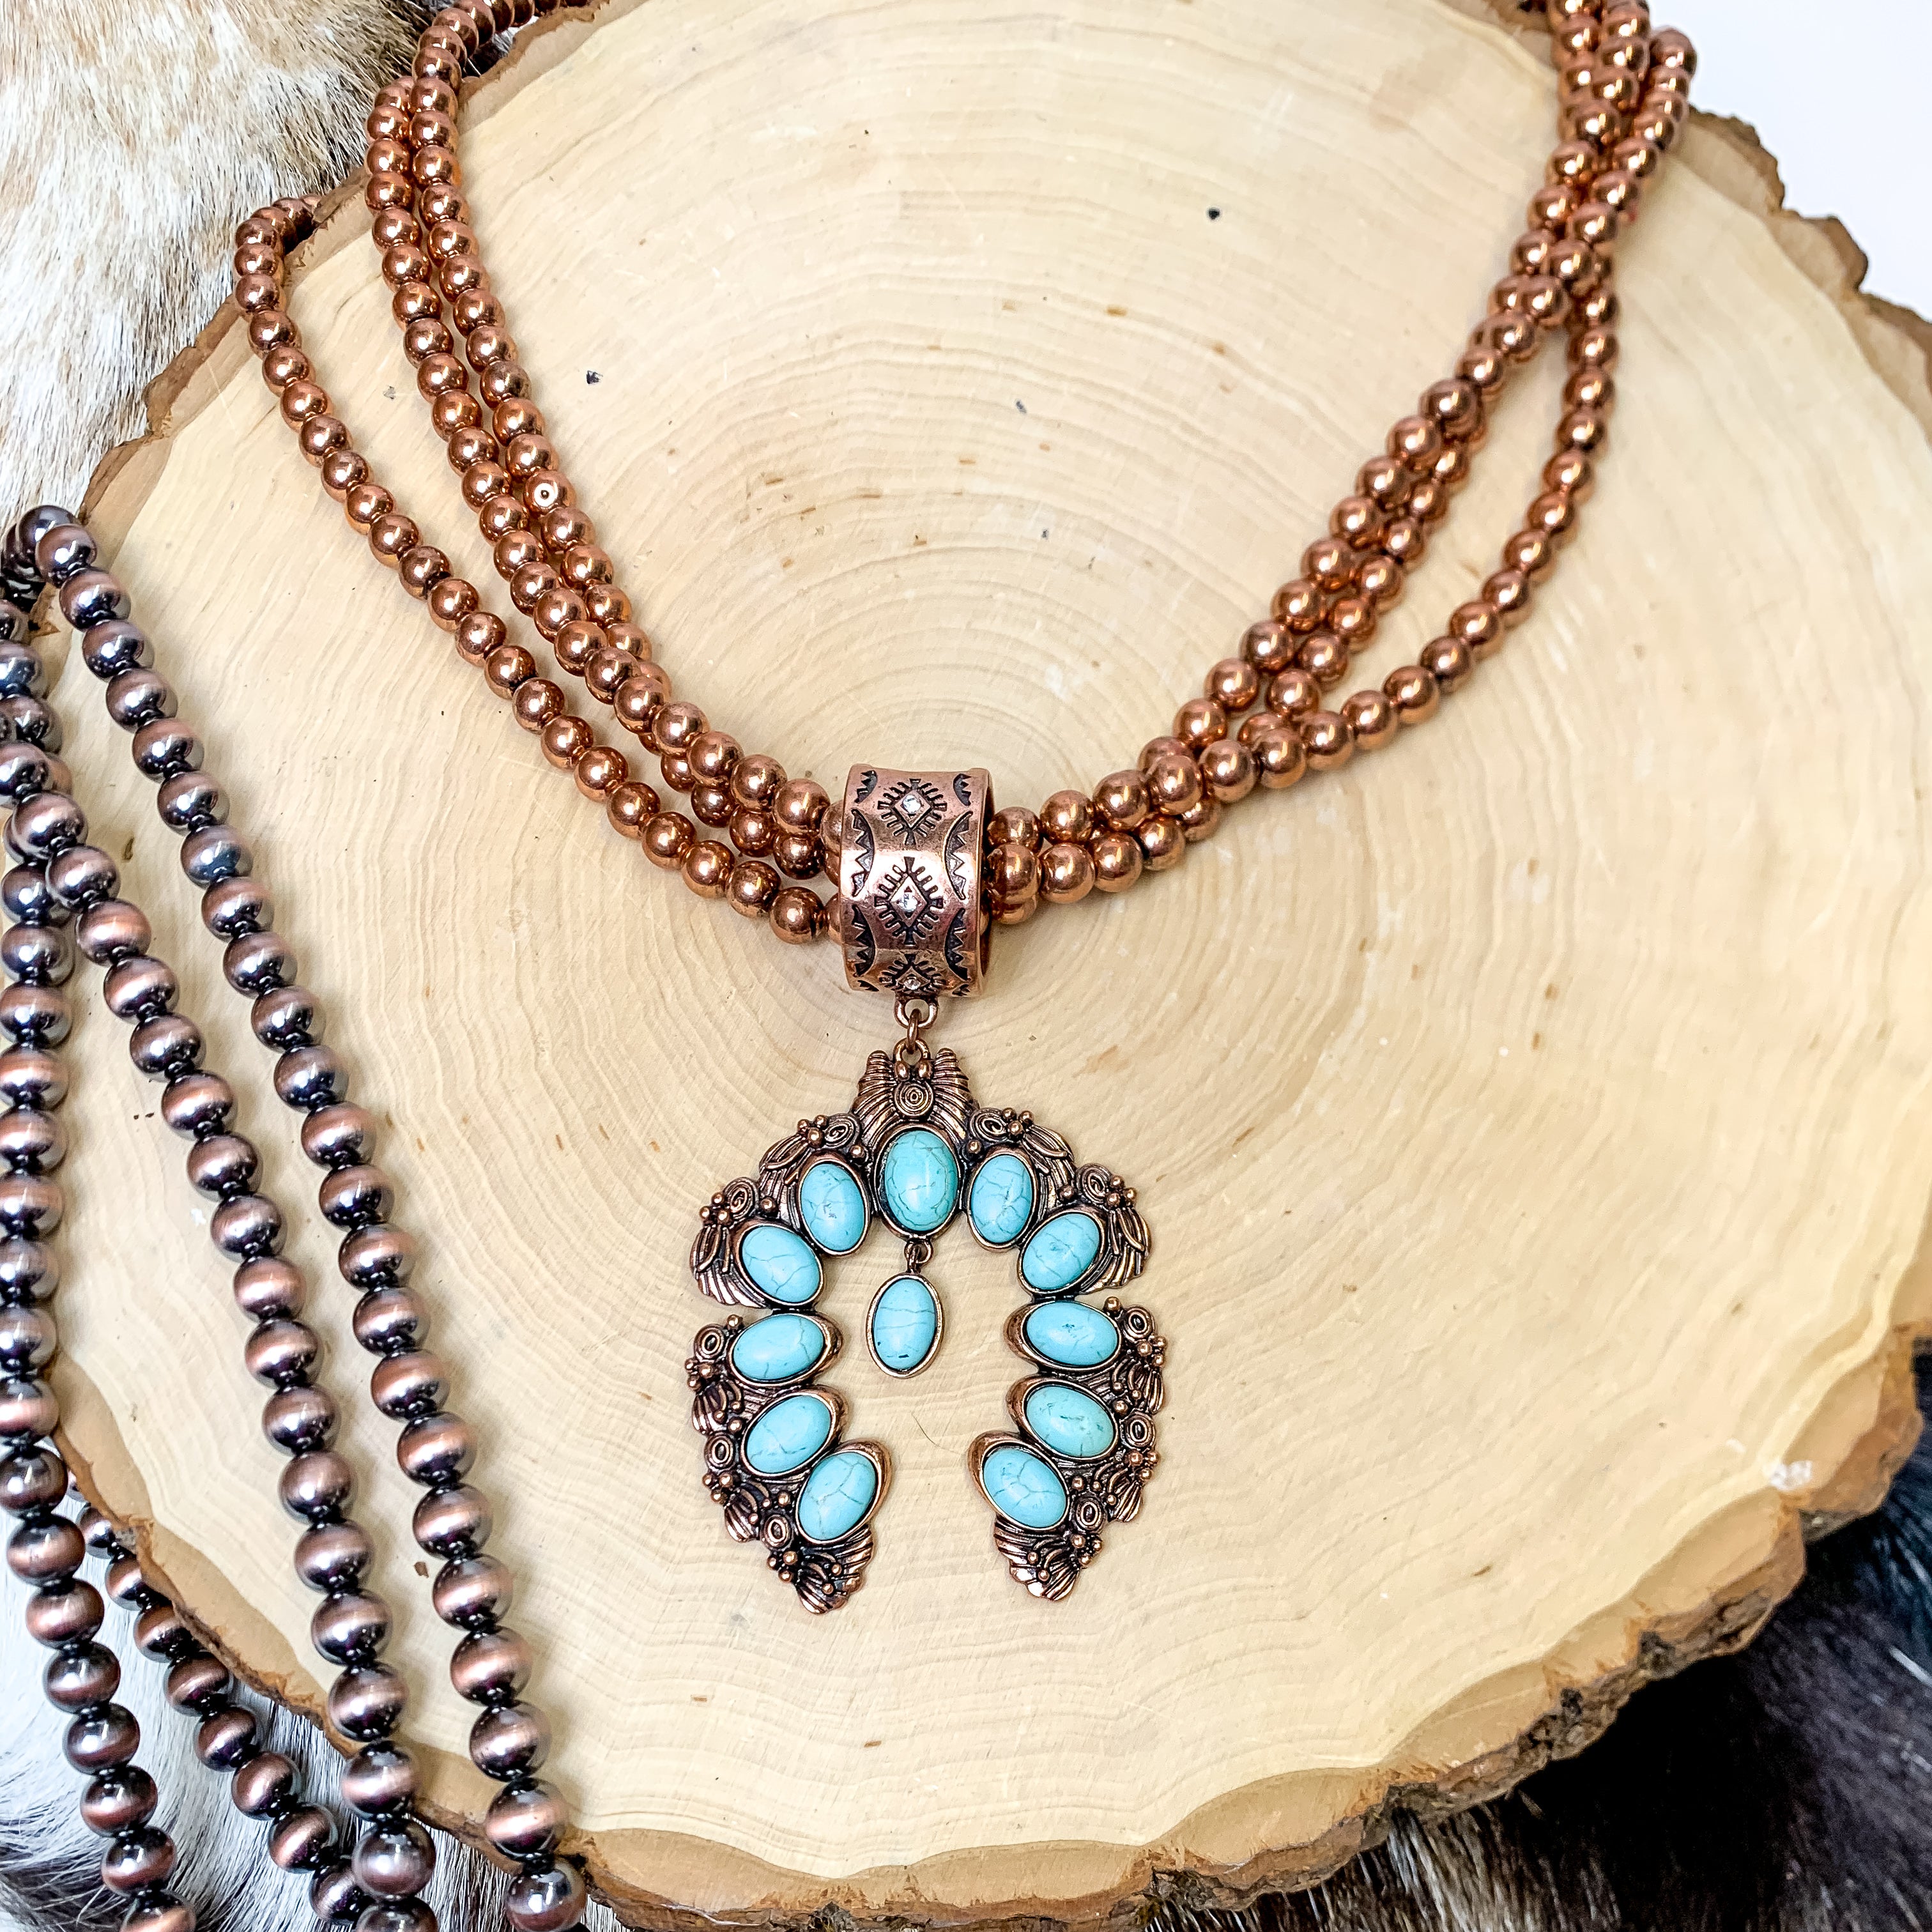 Copper Tone Beaded Necklace With Stones and Naja Pendant in Turquoise Blue - Giddy Up Glamour Boutique